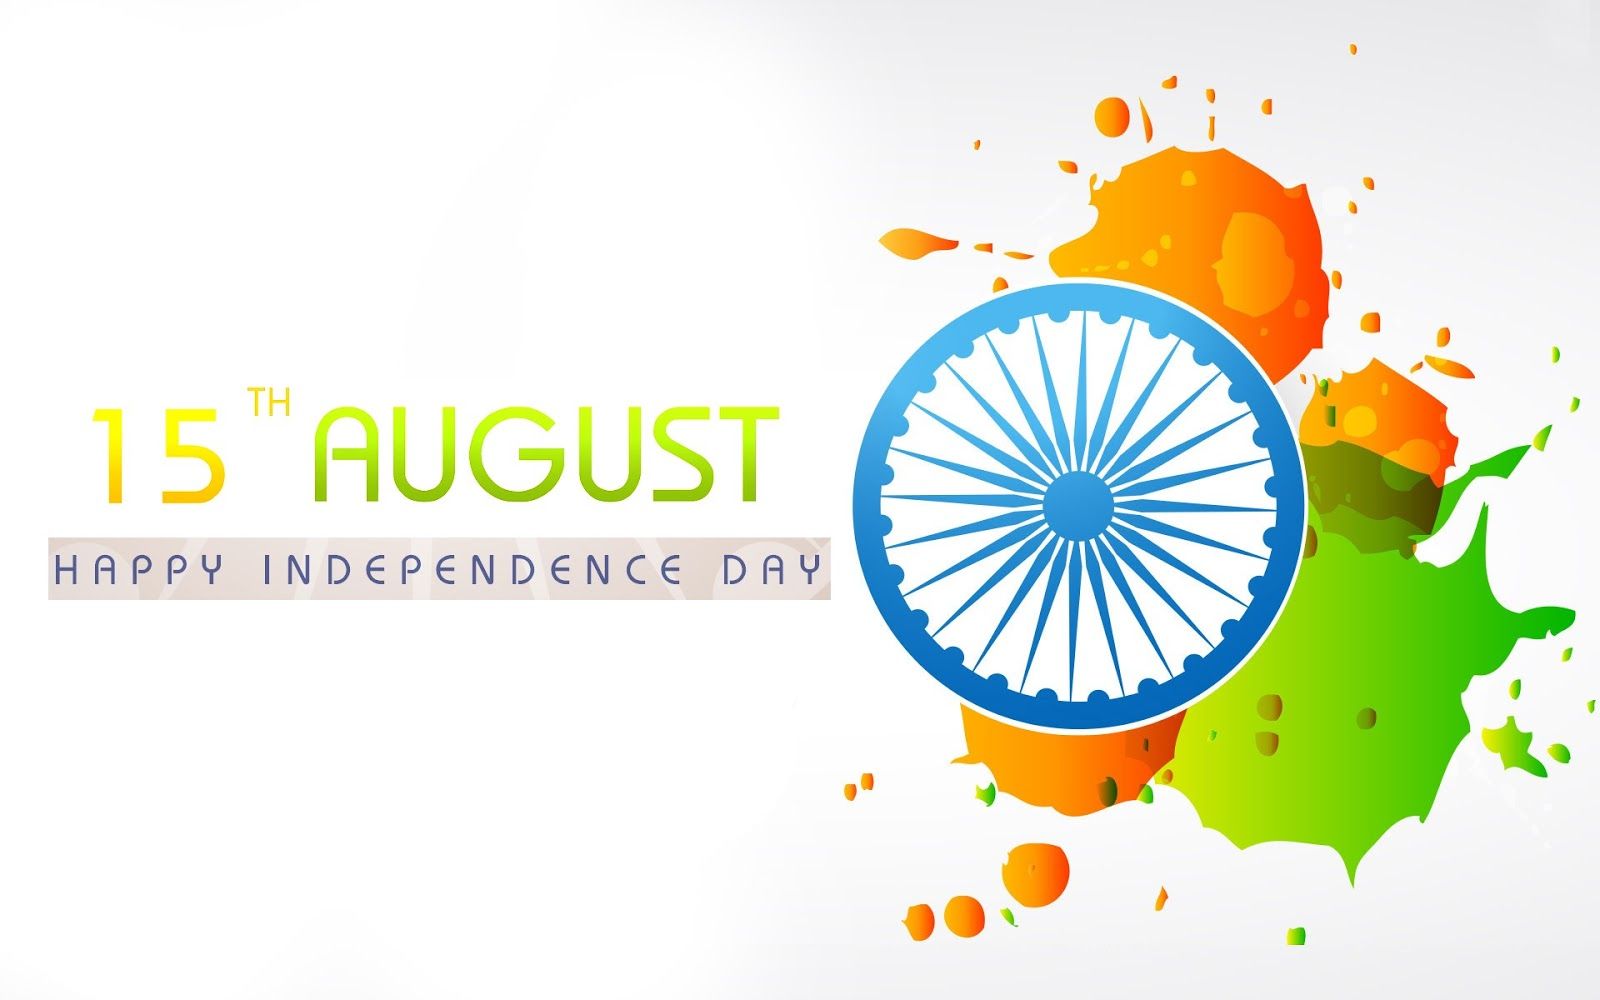 Independence Day Image 2020 Download August Wallpaper, Picture, Pics Friendship Day Status 2020